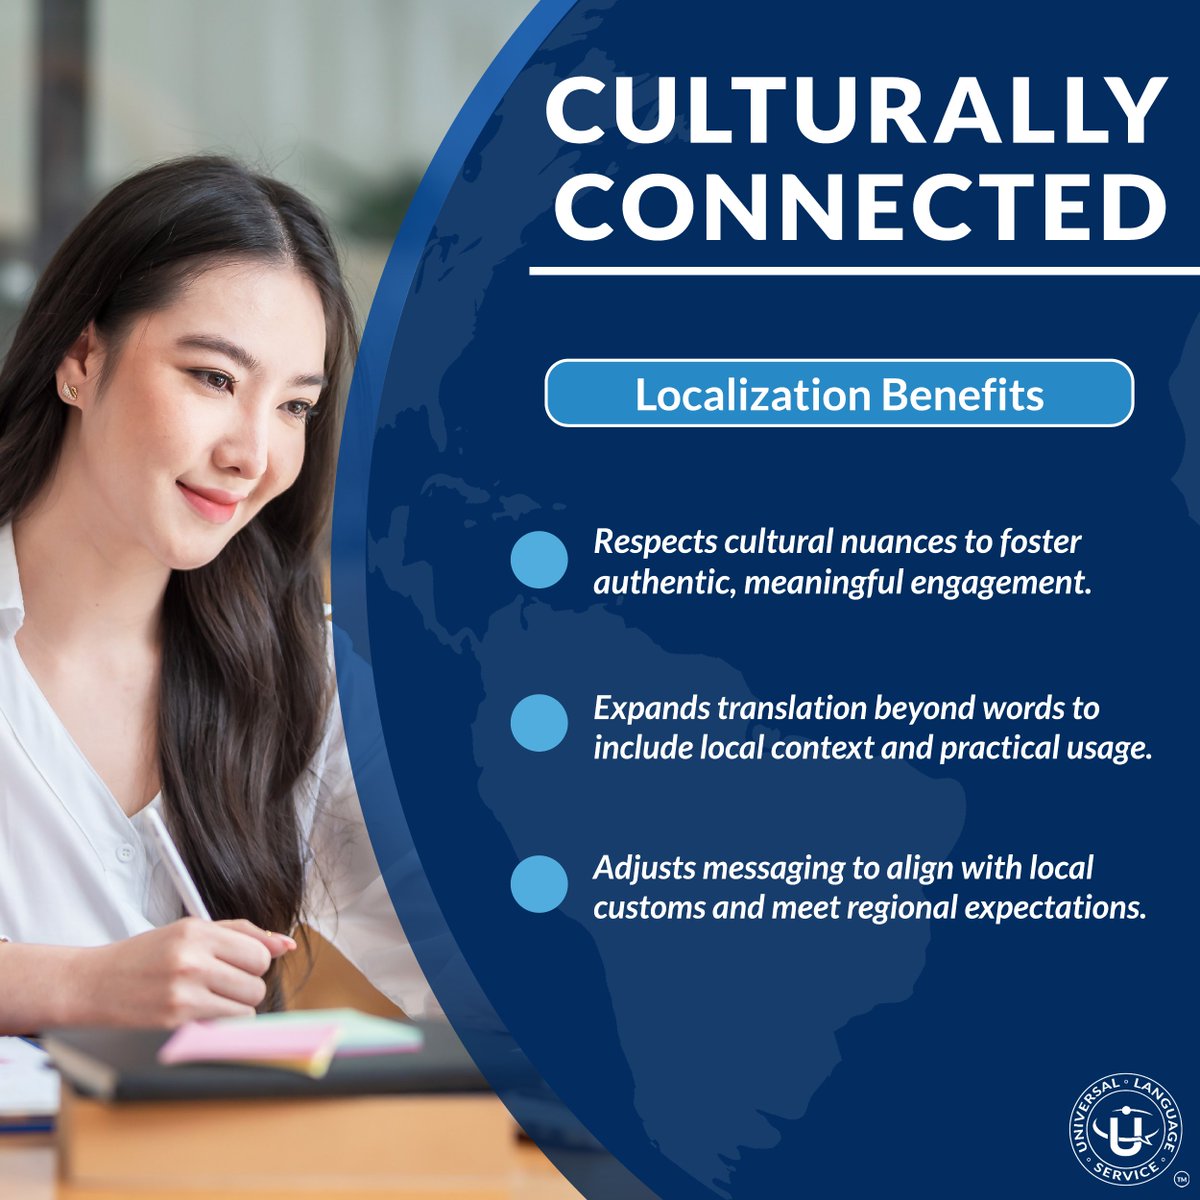 Dive into the heart of every culture with localization that respects nuances and fosters genuine engagement. At UniversalLanguage, we’re proud to offer expert localization services that ensure your voice is truly global. 🔗 universallanguageservice.com #Interpreting #Localization